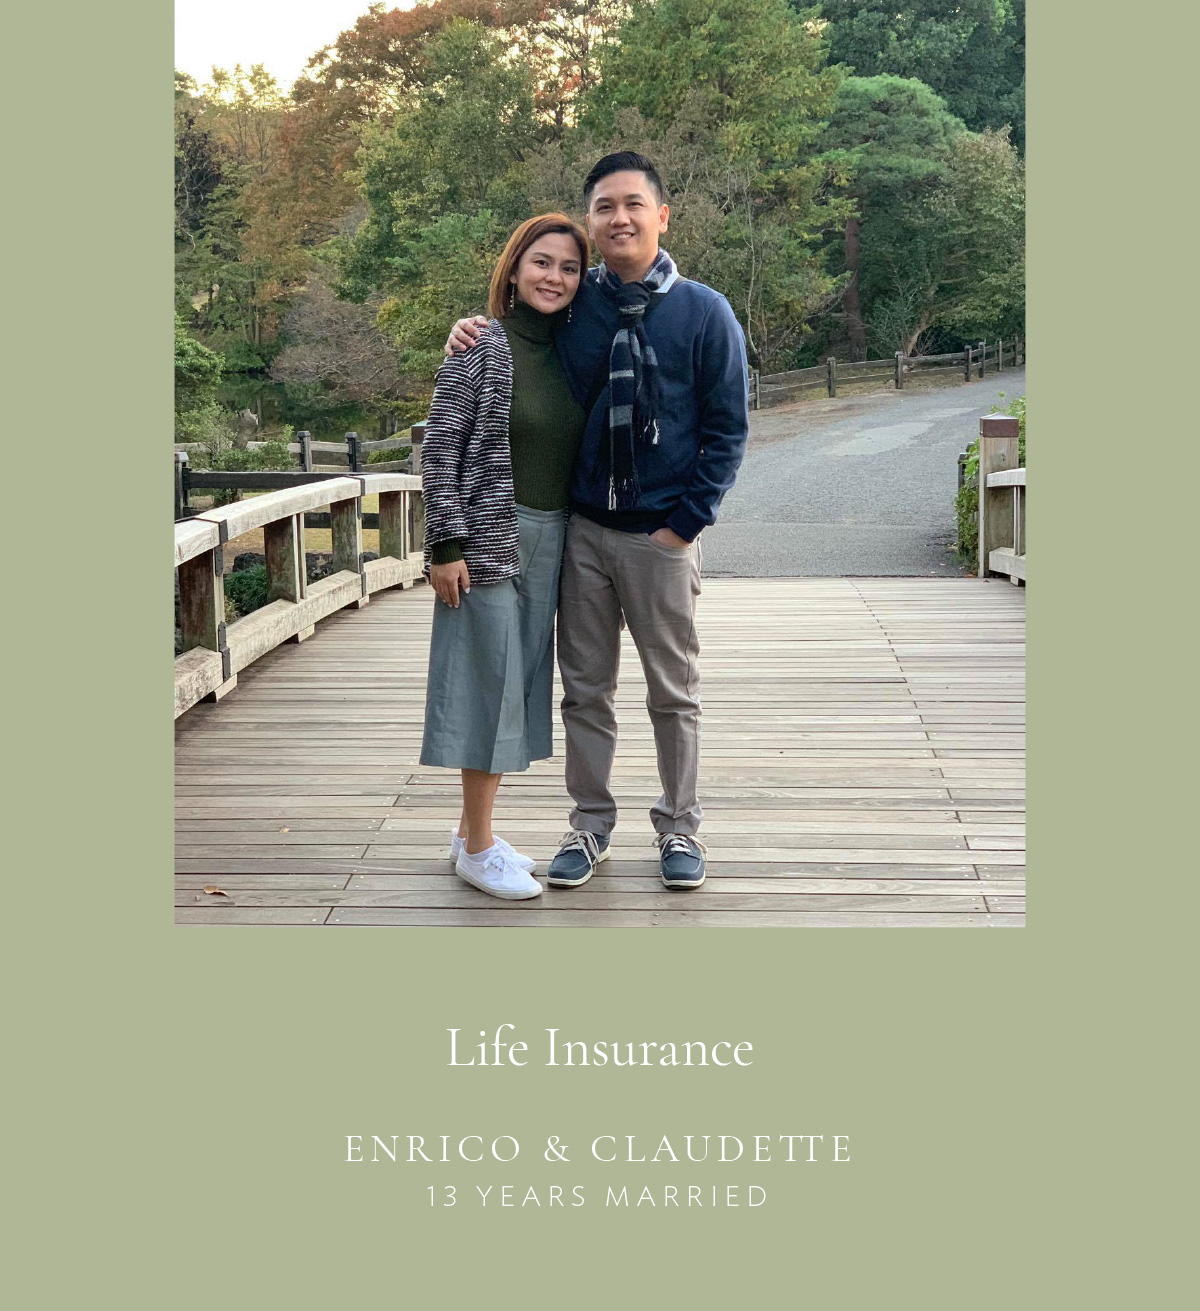 (Layout with photo) Life Insurance - Enrico and Claudette, 13 years married